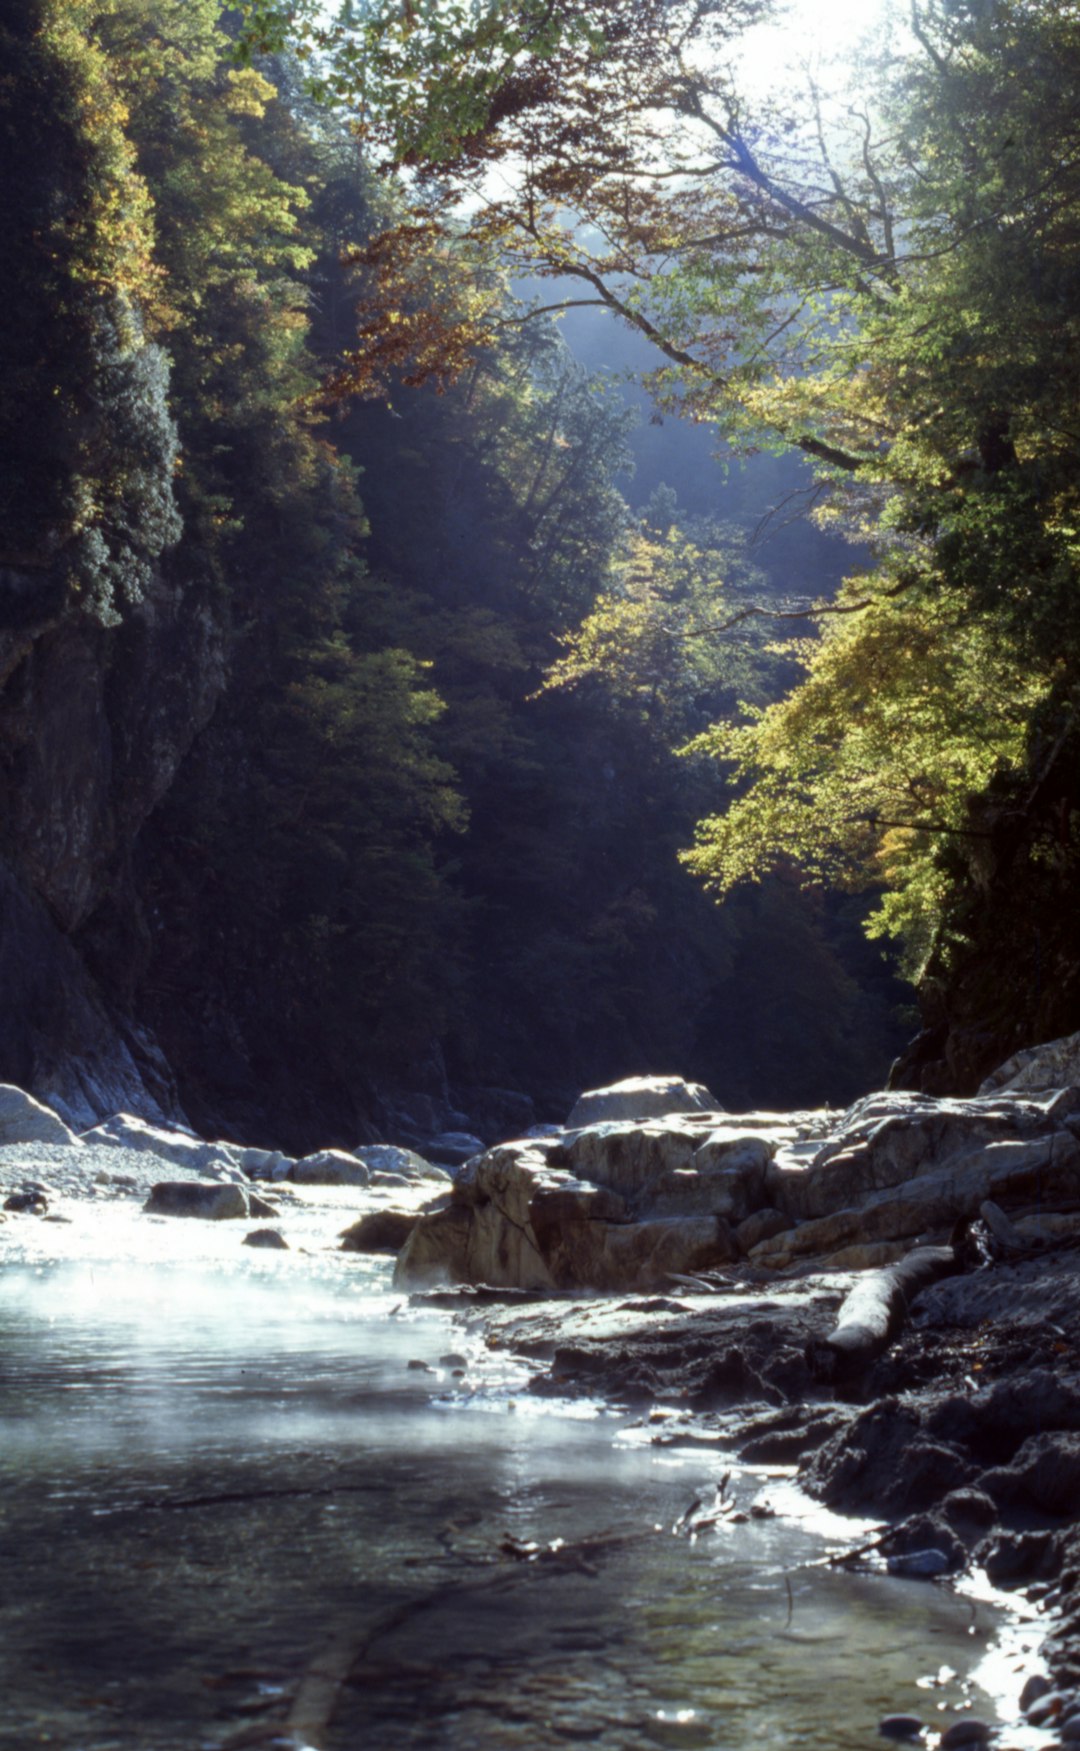 Travel Tips and Stories of Kurobe River in Japan